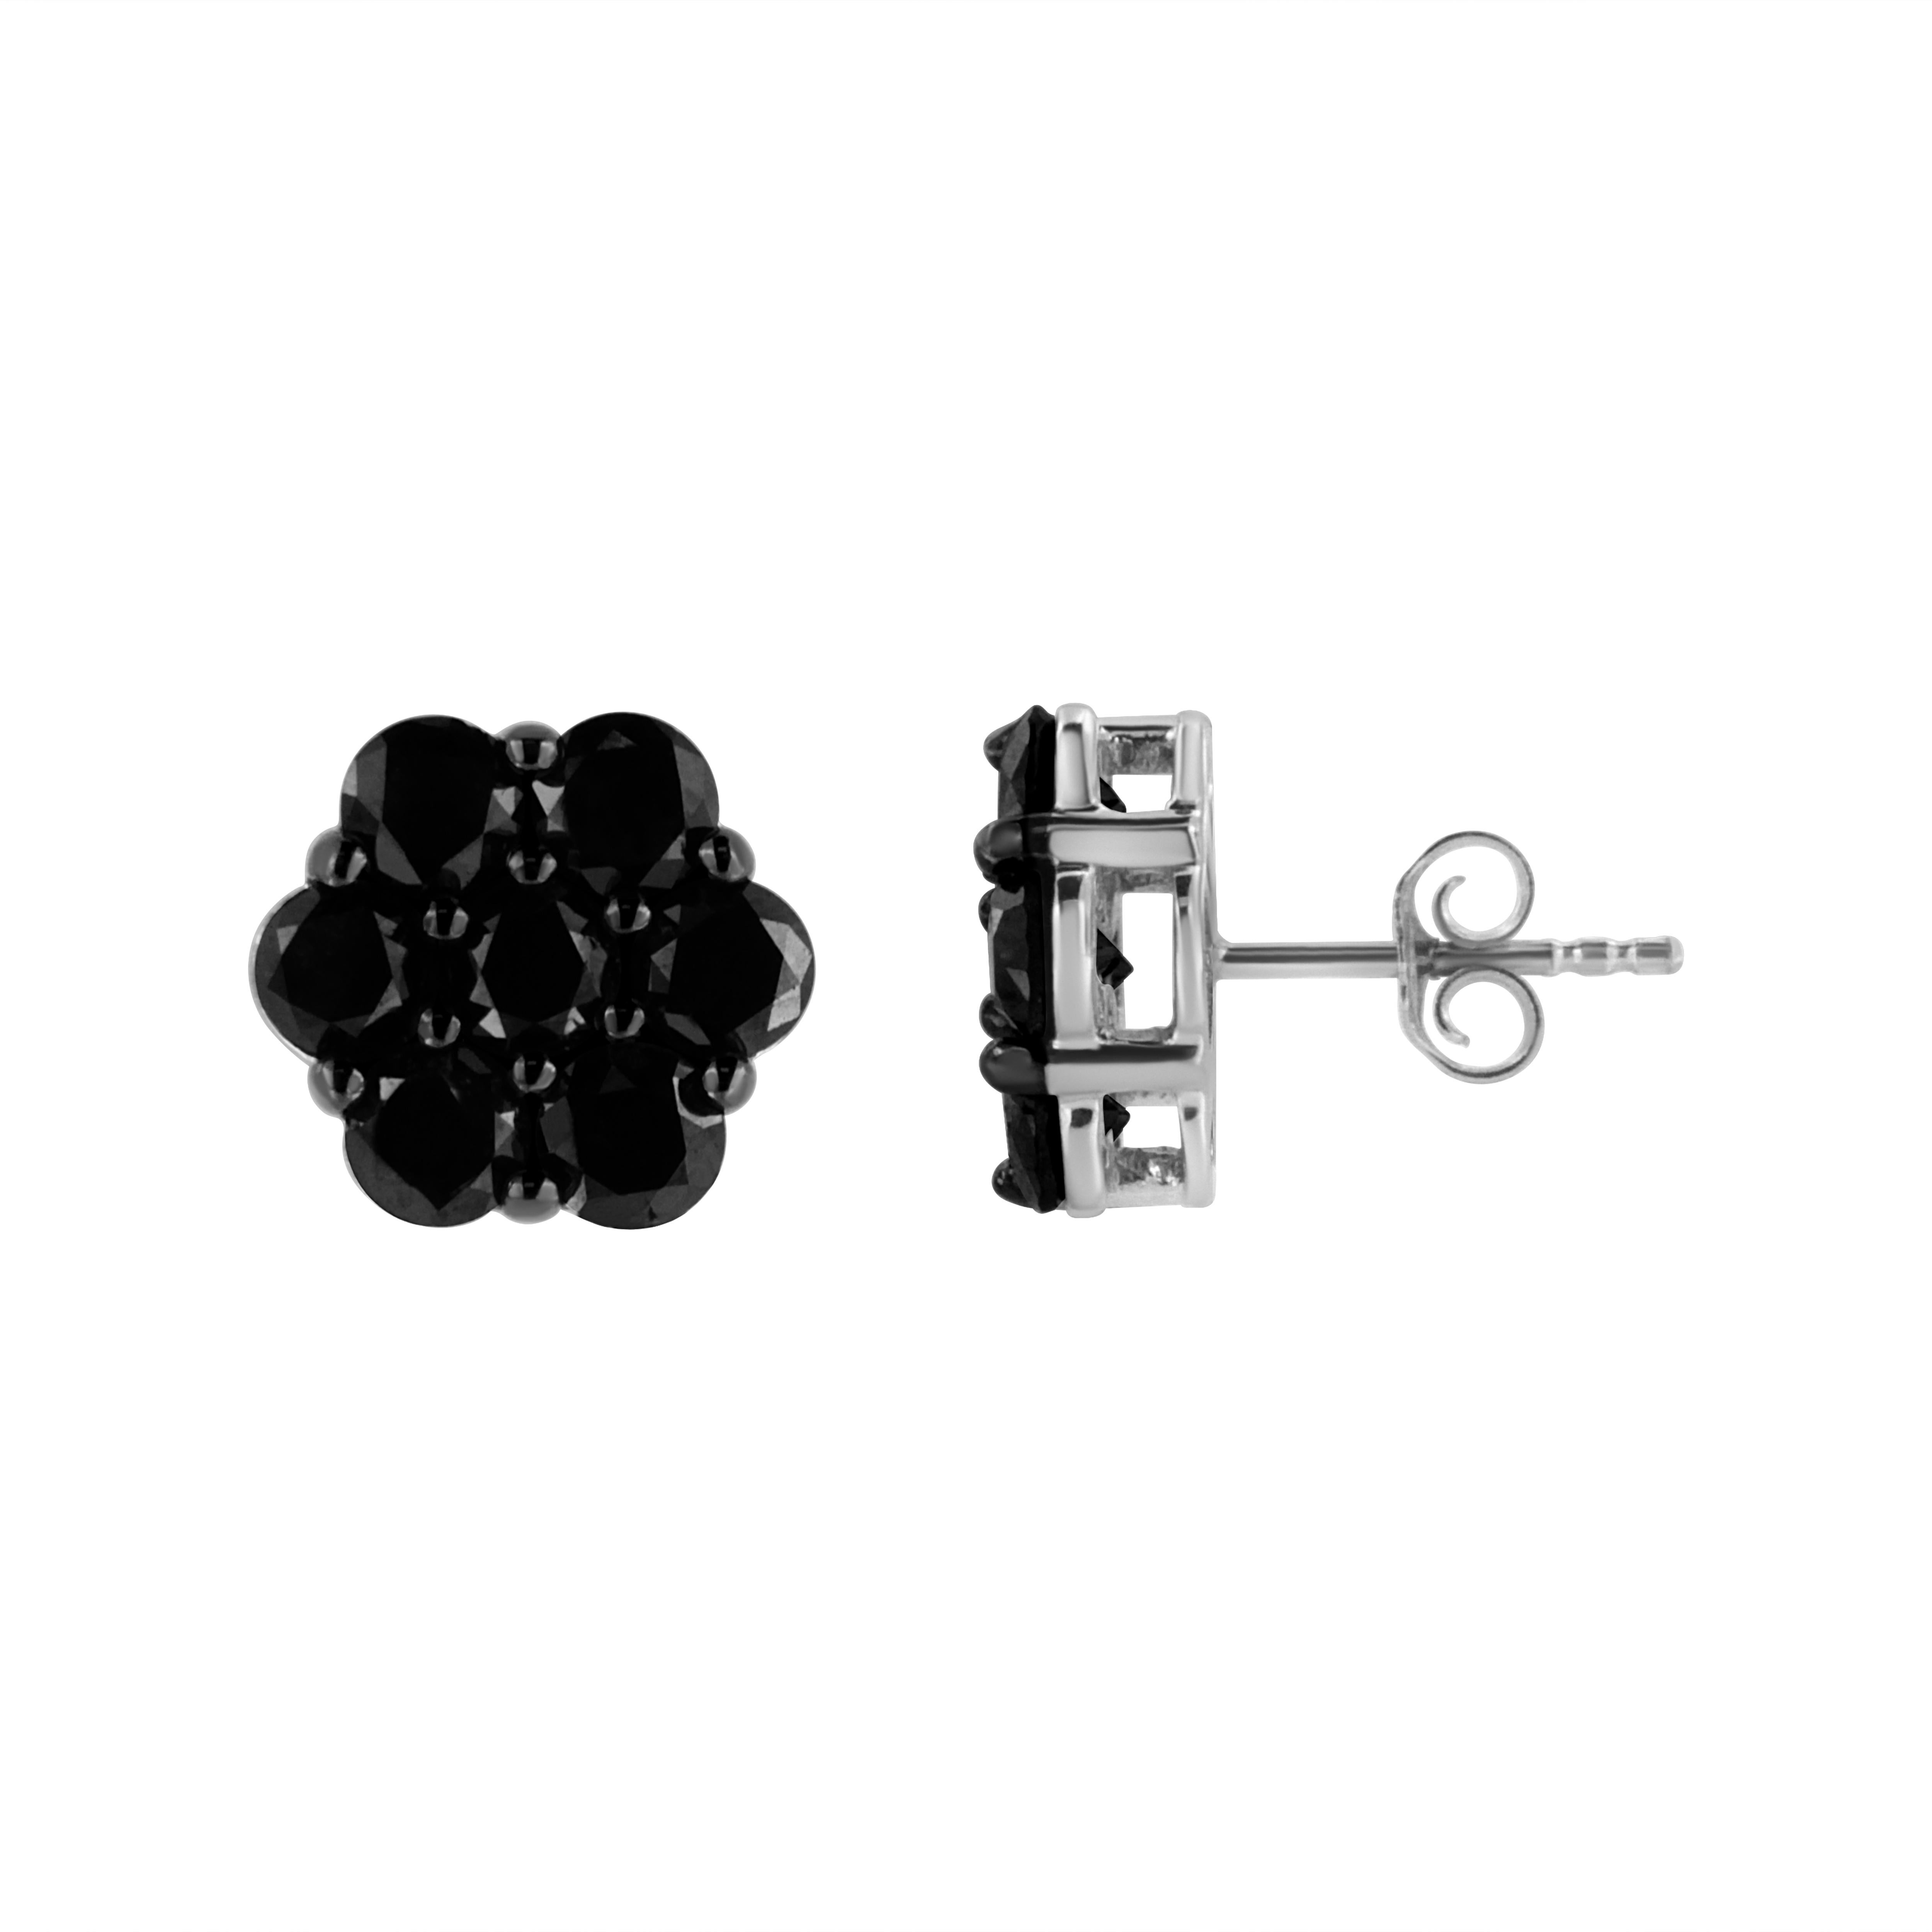 You will fall in love with these classic cluster stud earrings. A must have for any serious jewelry collection, these .925 sterling earrings boast an impressive 1/2 carat total weight of treated black	 diamonds with seven stones each. The earrings